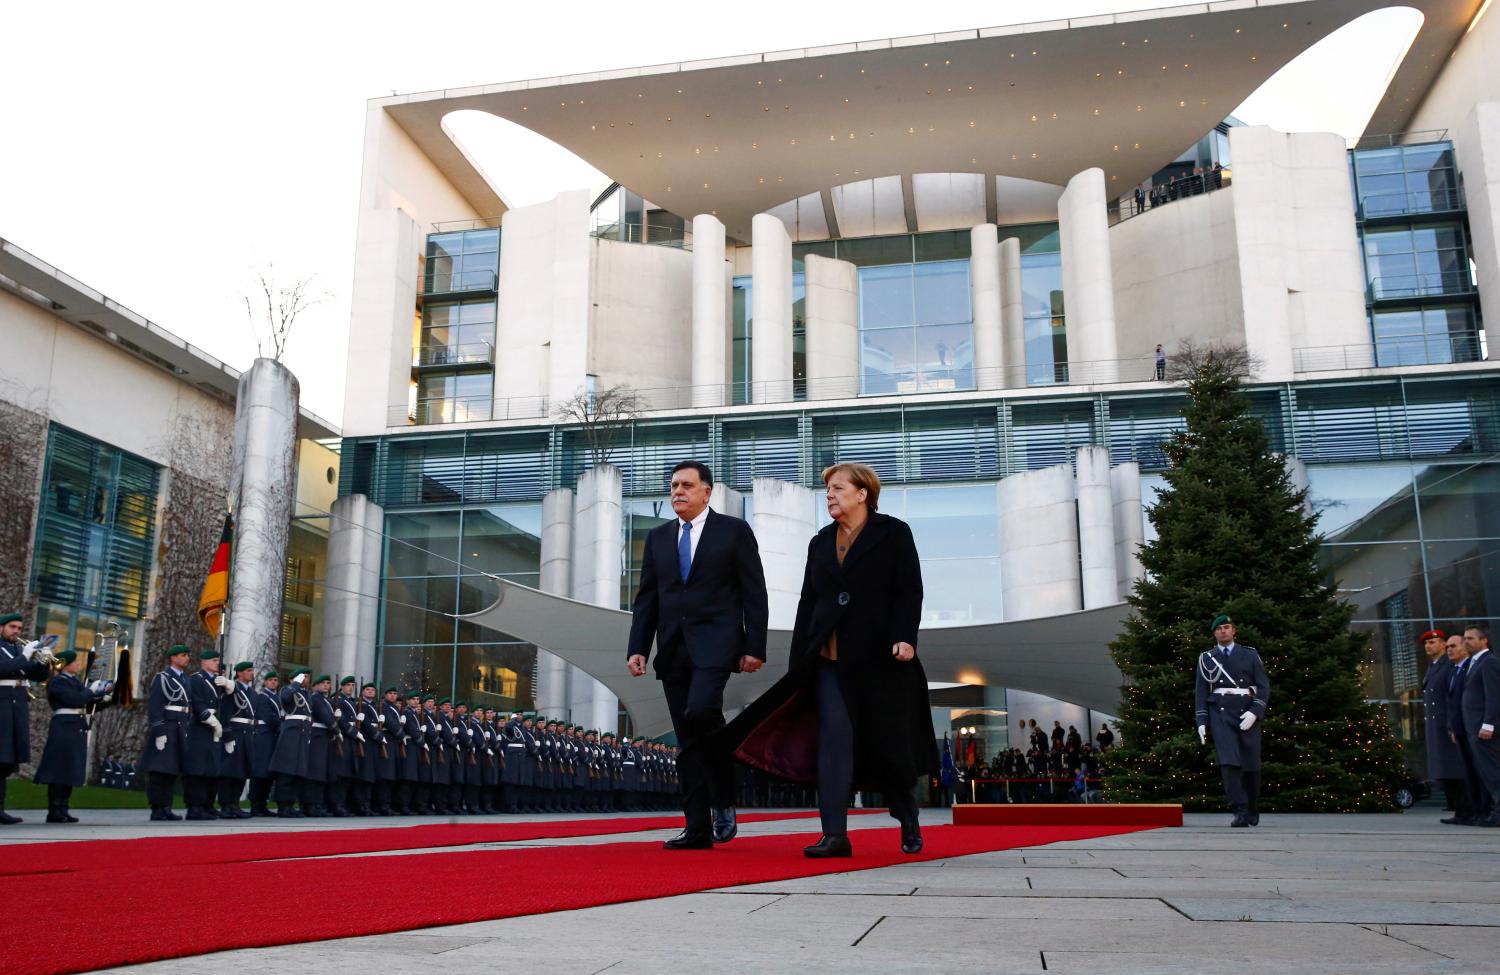 German Chancellor Angela Merkel and Libyan Prime Minister Fayez al-Sarraj walk during a welcome ceremony at the Chancellery in Berlin, Germany, December 7, 2017. REUTERS/Fabrizio Bensch - RC184FAC1510